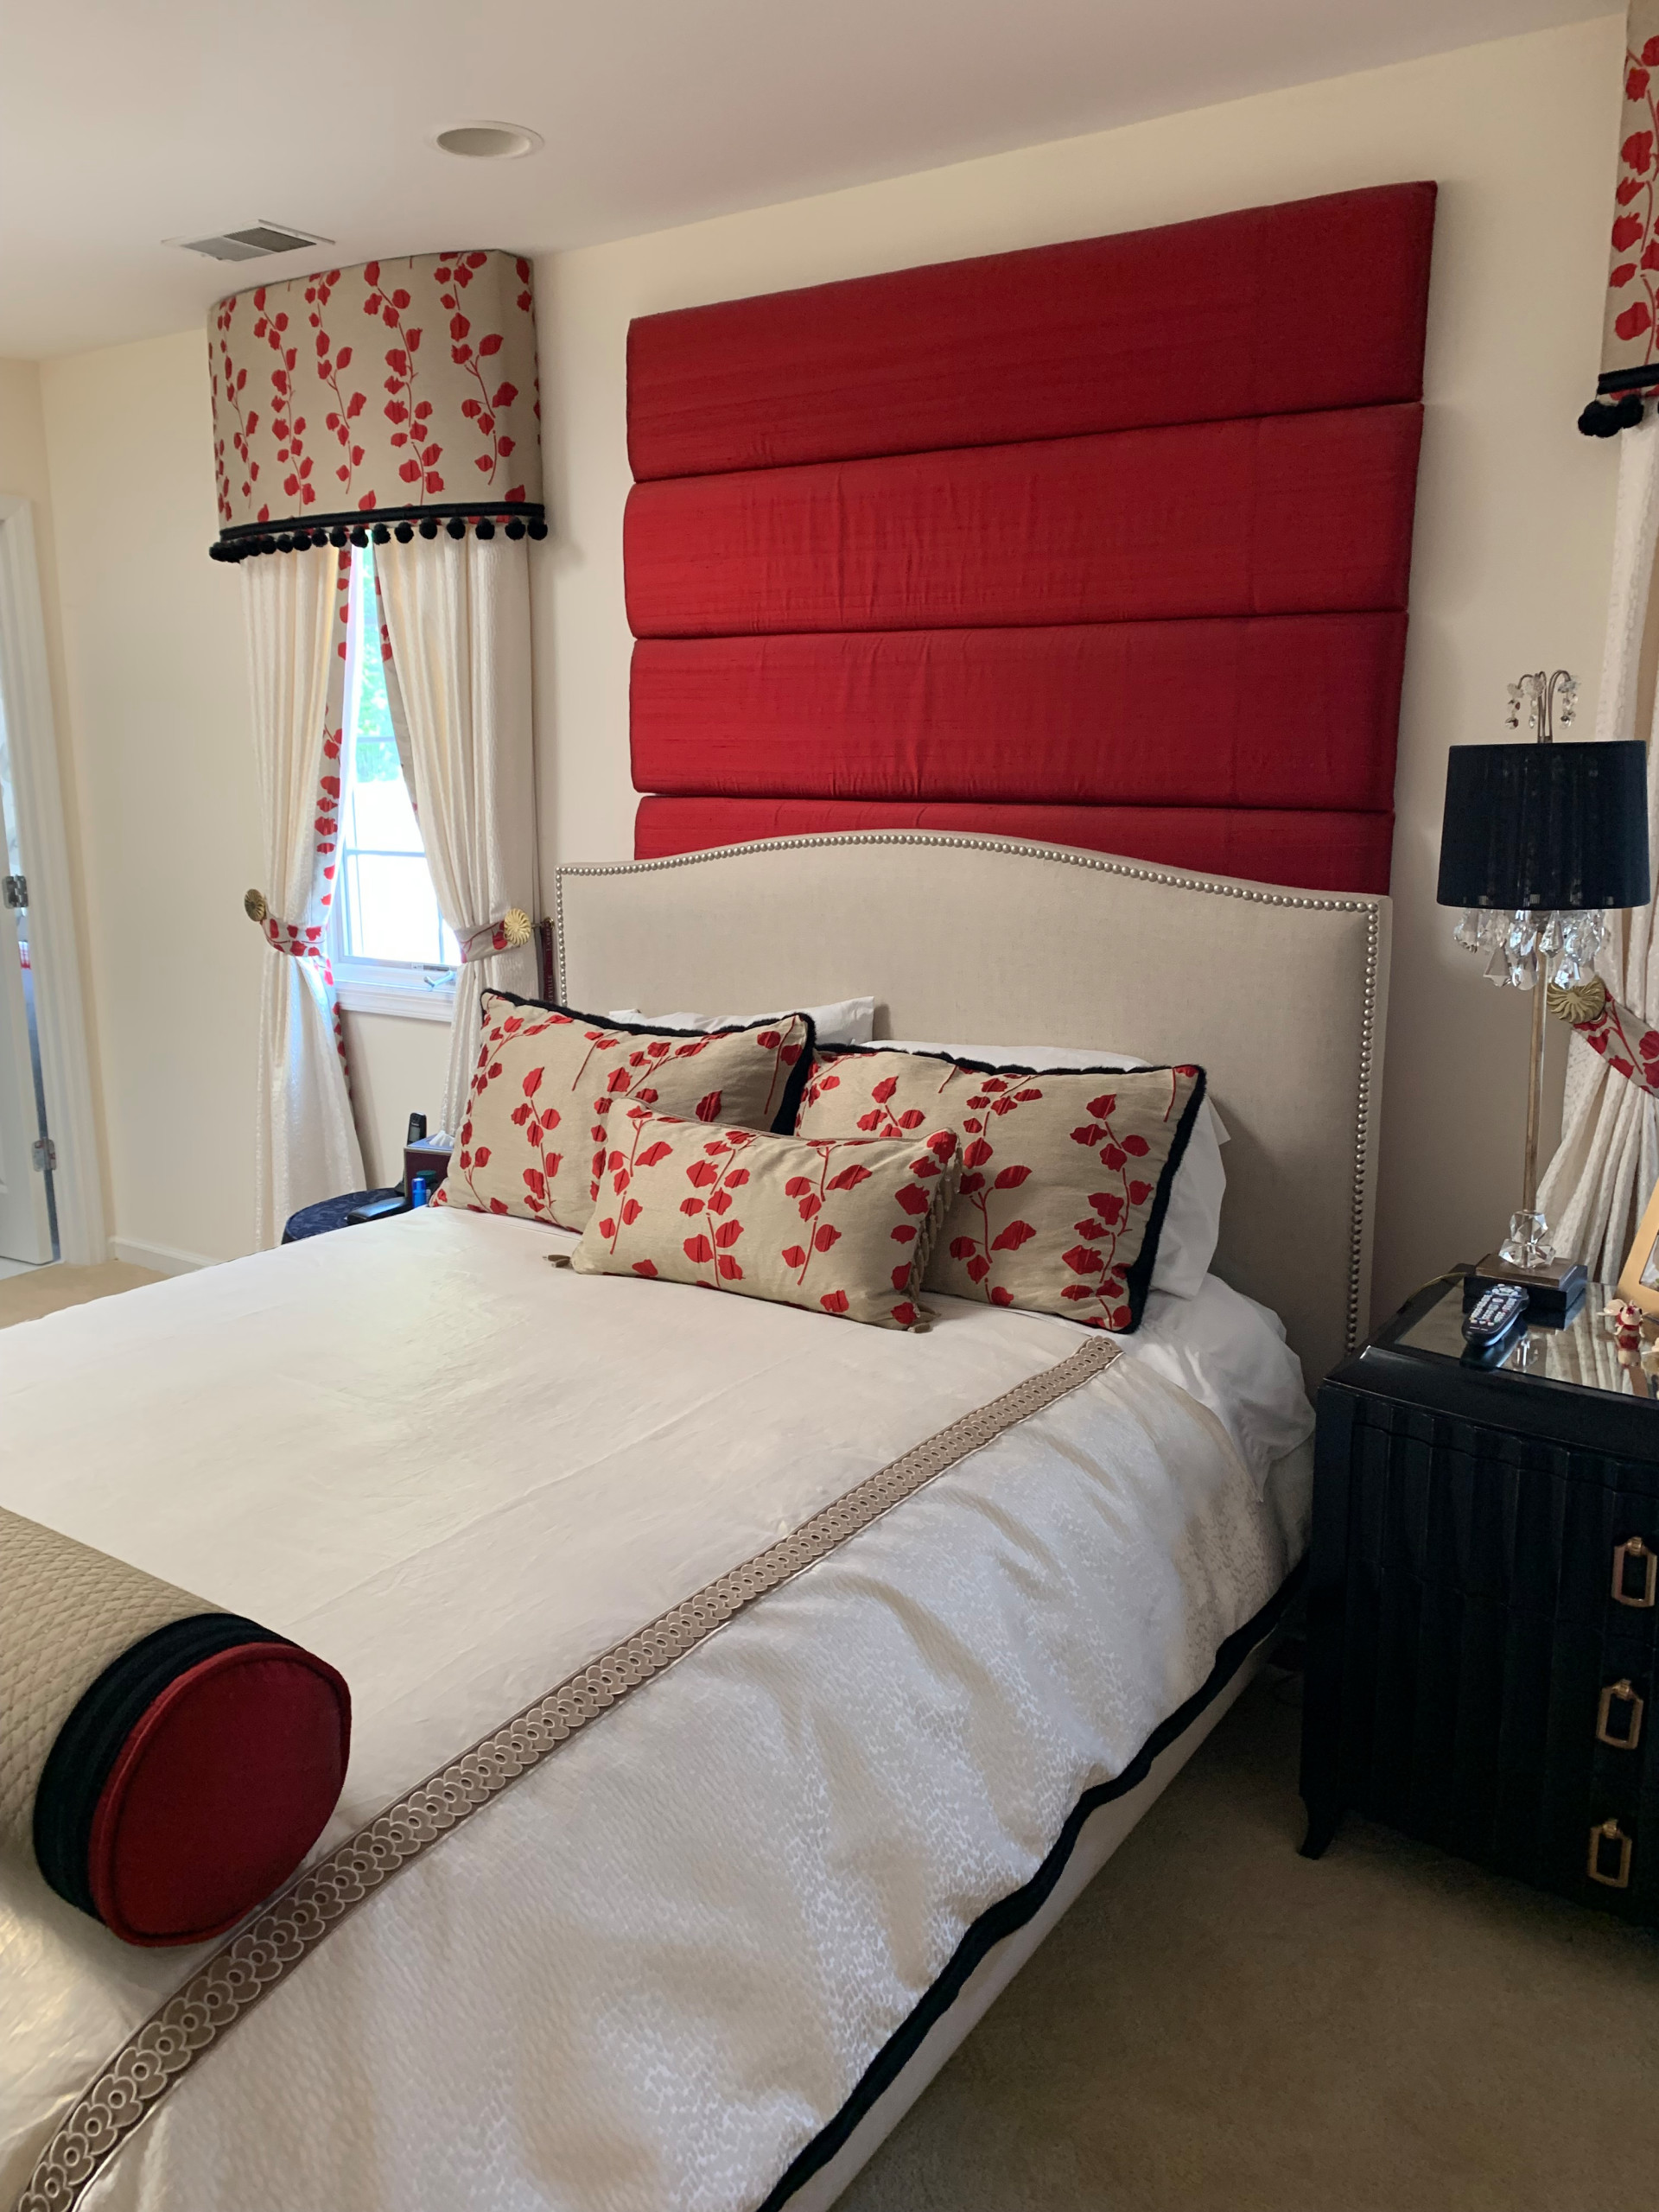 Bedroom Before and After - Beautiful both ways!